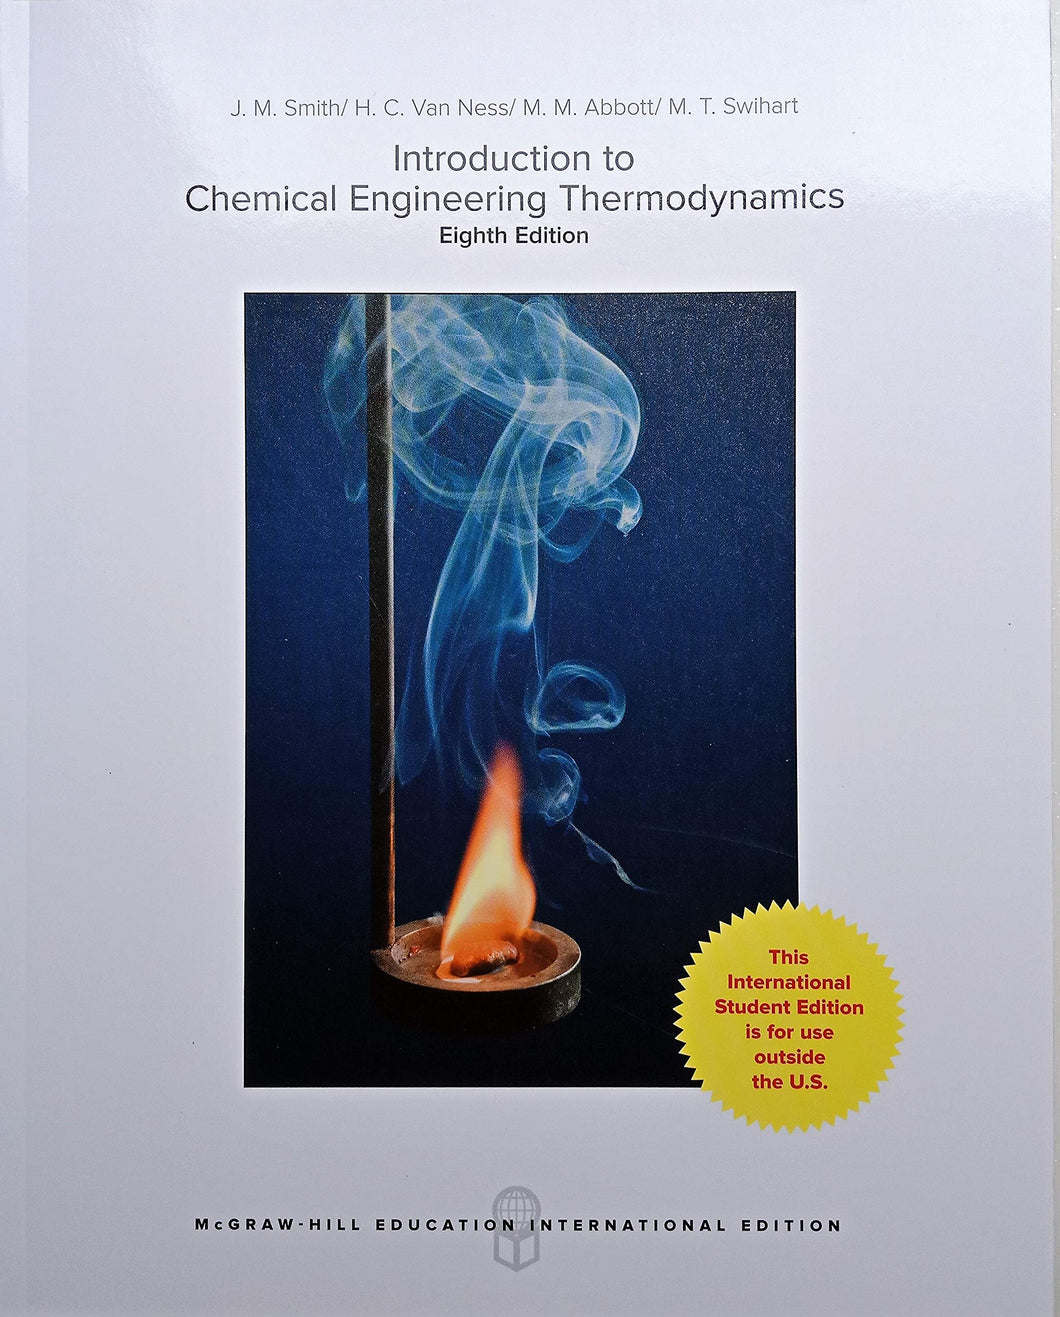 Introduction to Chemical Engineering Thermodynamics [Paperback] 8e by Smith - Smiling Bookstore